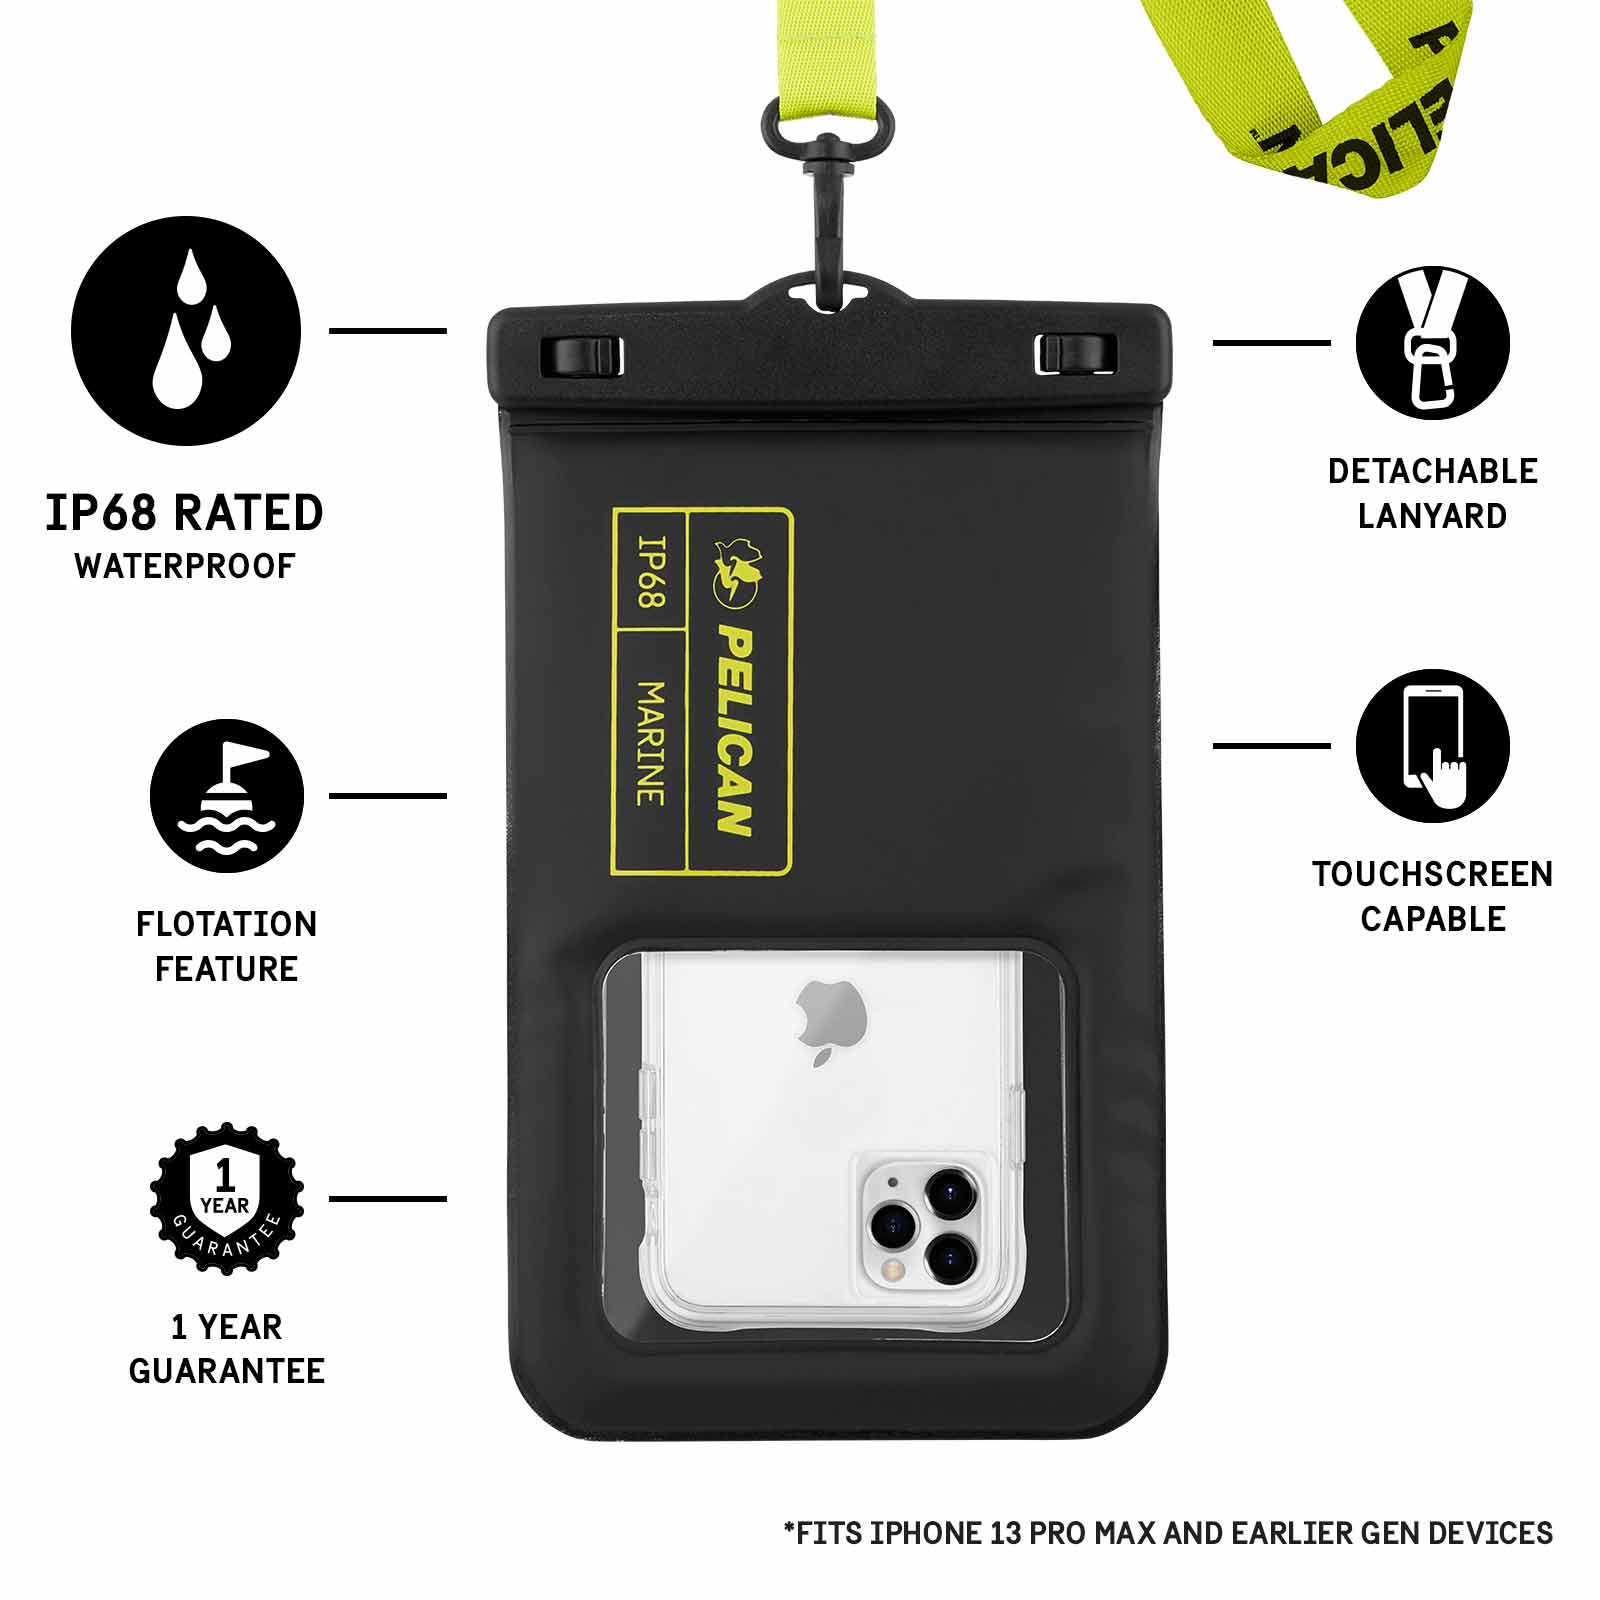 IP68 Rated Waterproof, Flotation feature, 1 year guarantee, detachable lanyard, touchscreen compatible.  Fits iPhone 13 Pro Max and earlier gen devices. Color::Stealth Black